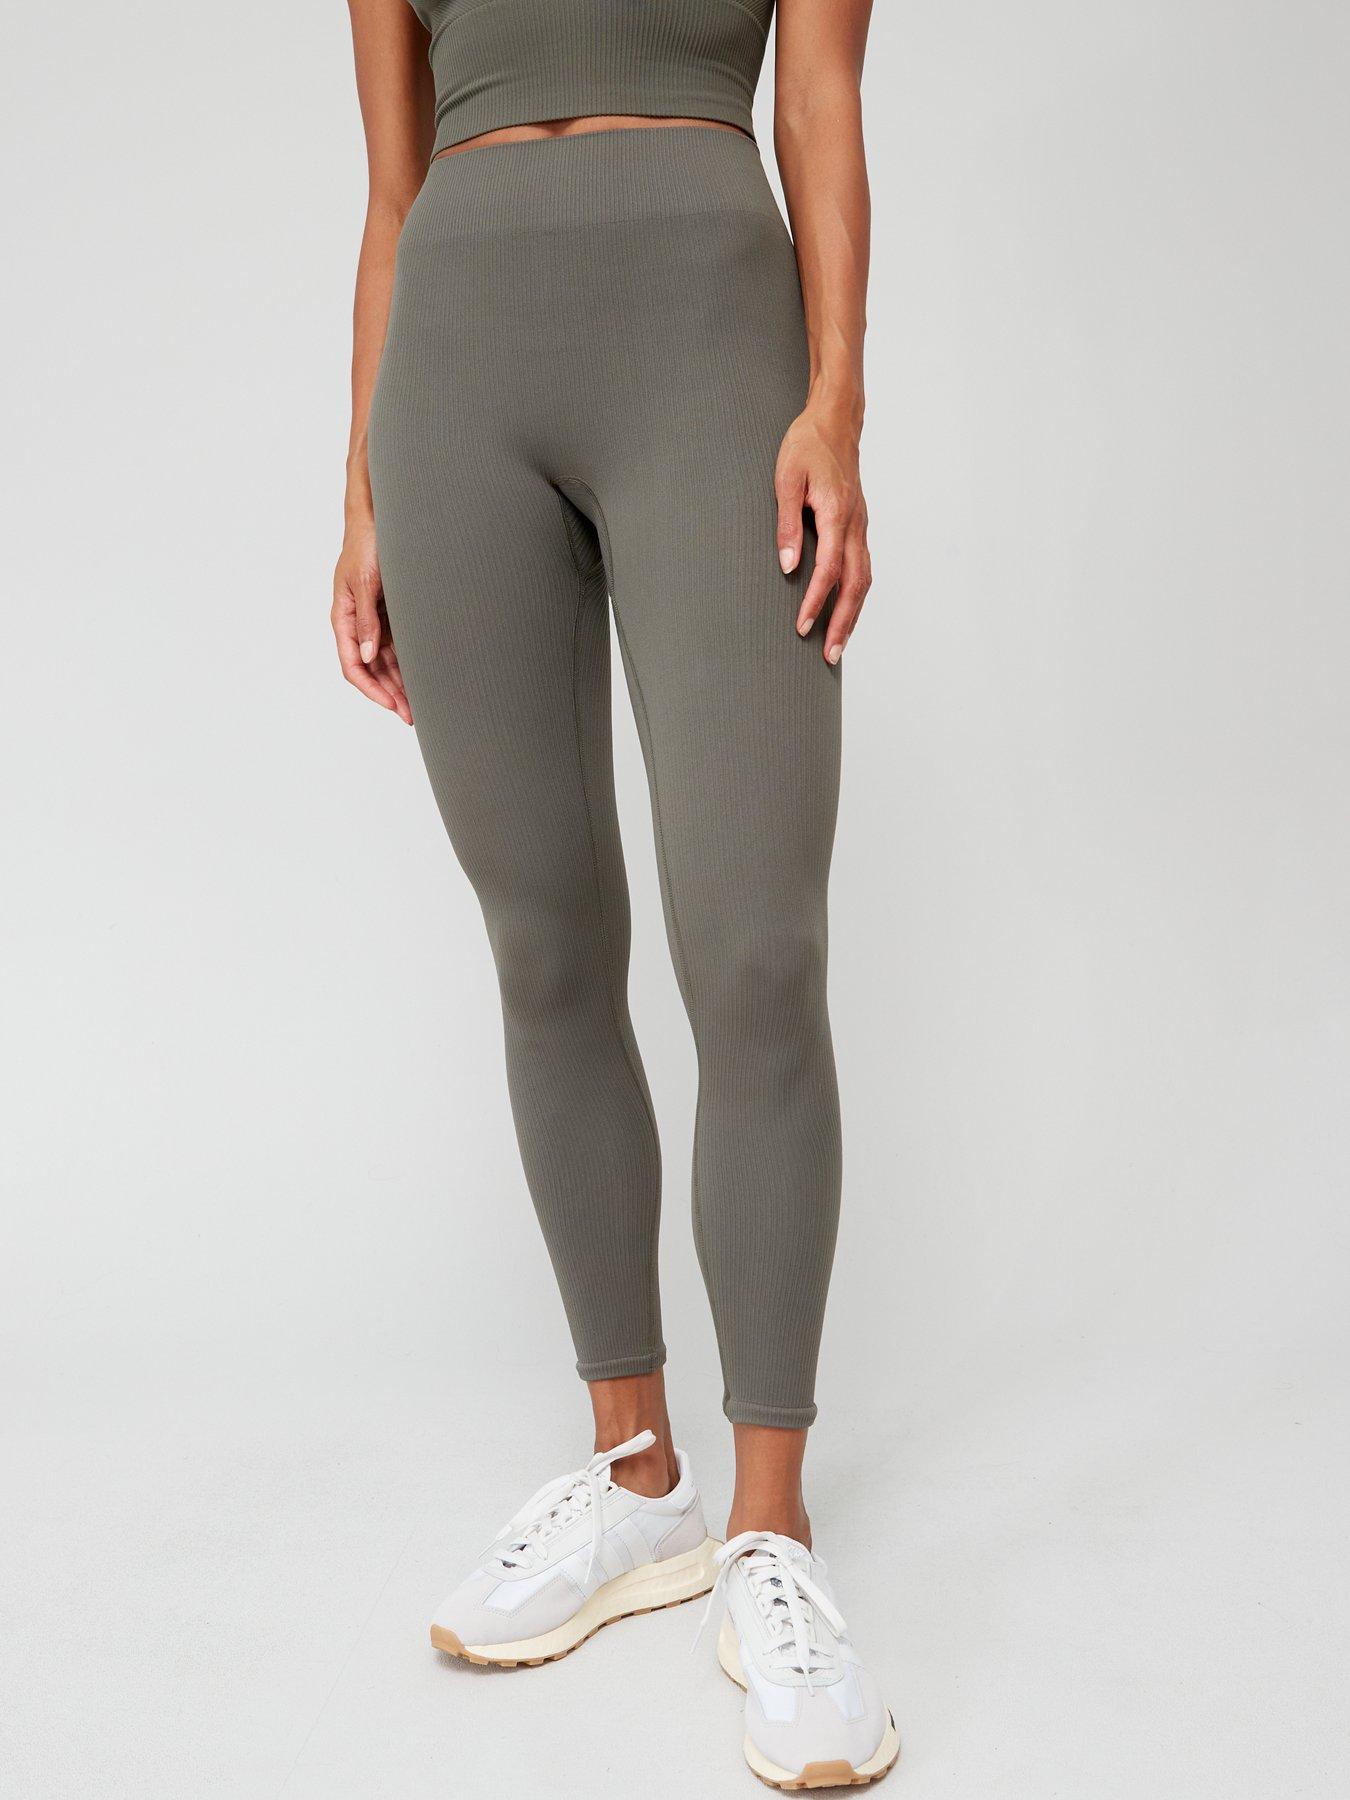 New to LLL. What size in this should I buy? (Me: 5'6, 120-125 lbs, 26  waist, 34 hips) : r/lululemon